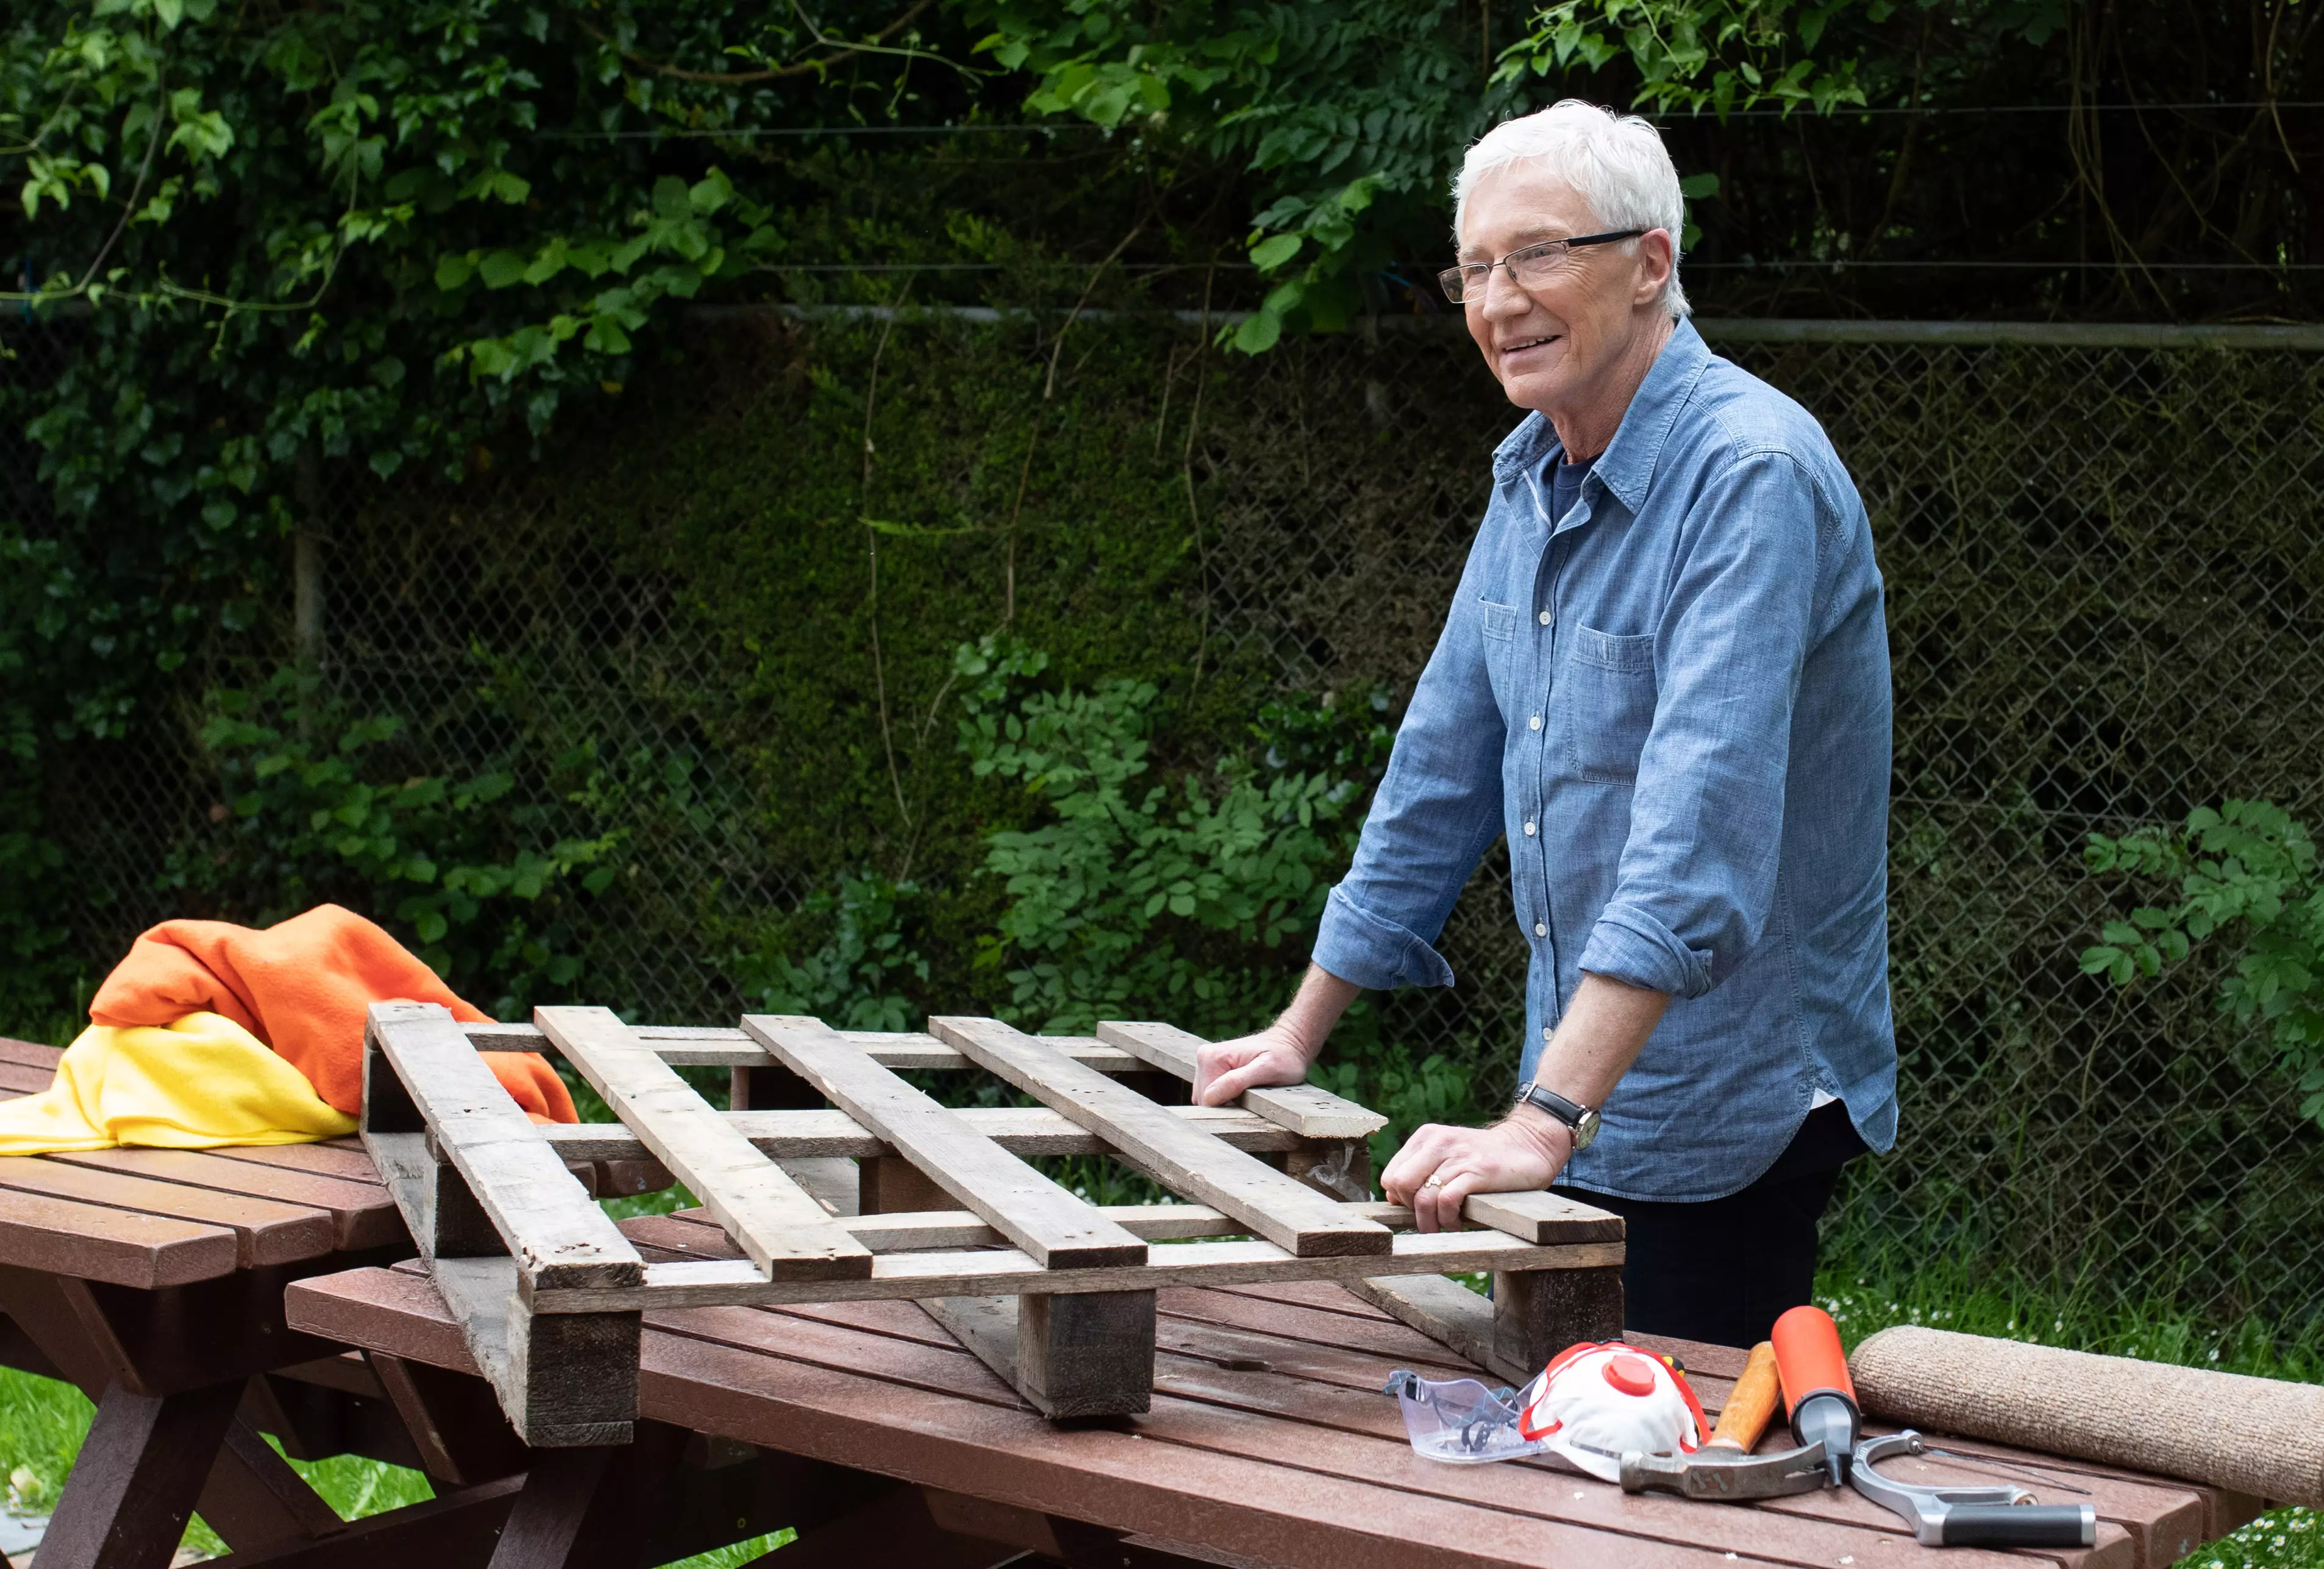 Paul O'Grady has built Archie a staircase so that he has control over how much interaction he has with visitors, which hopefully will give him more security. (